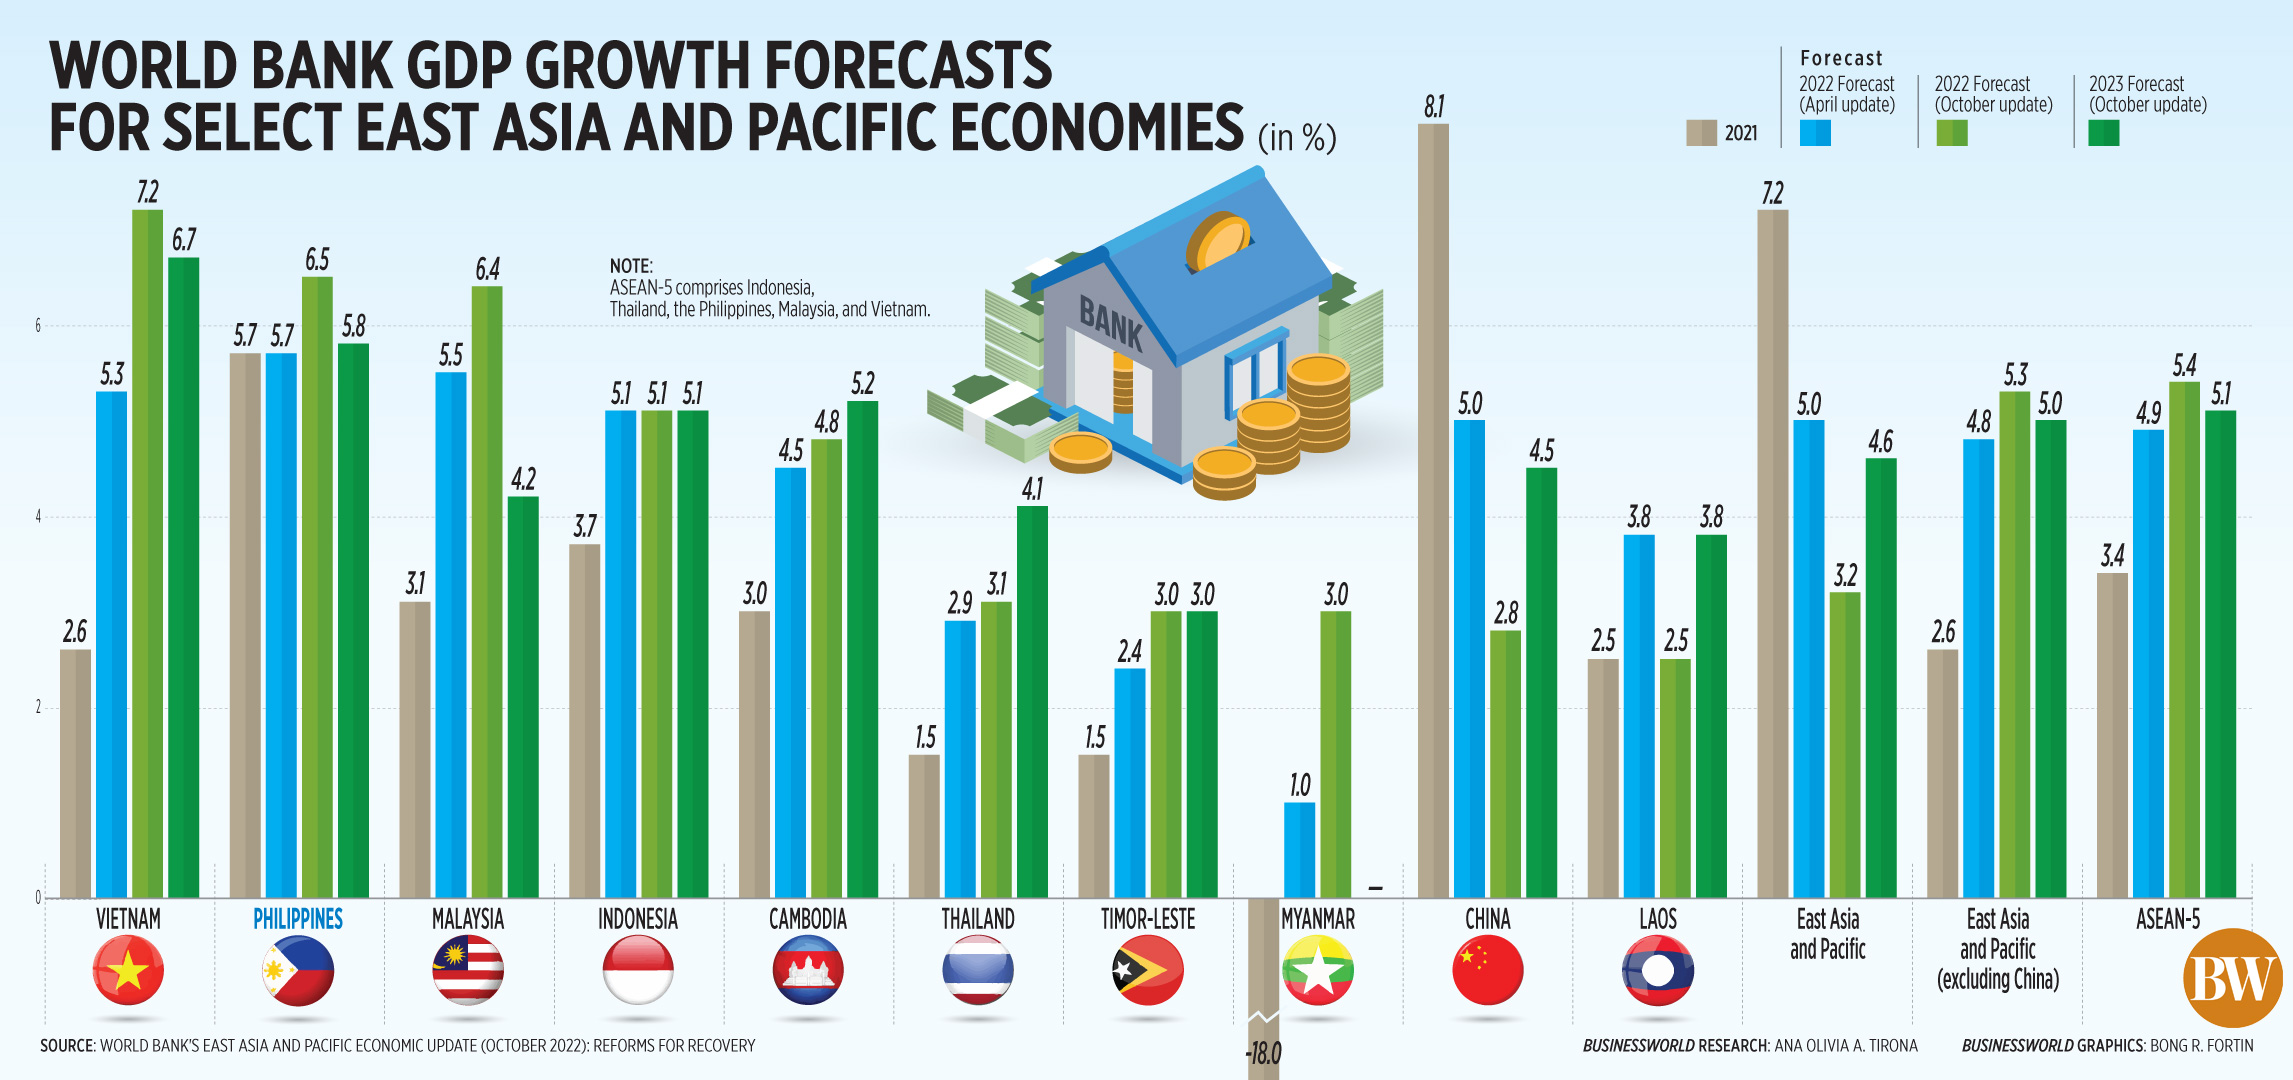 World Bank GDP growth forecasts for select East Asia and Pacific economies